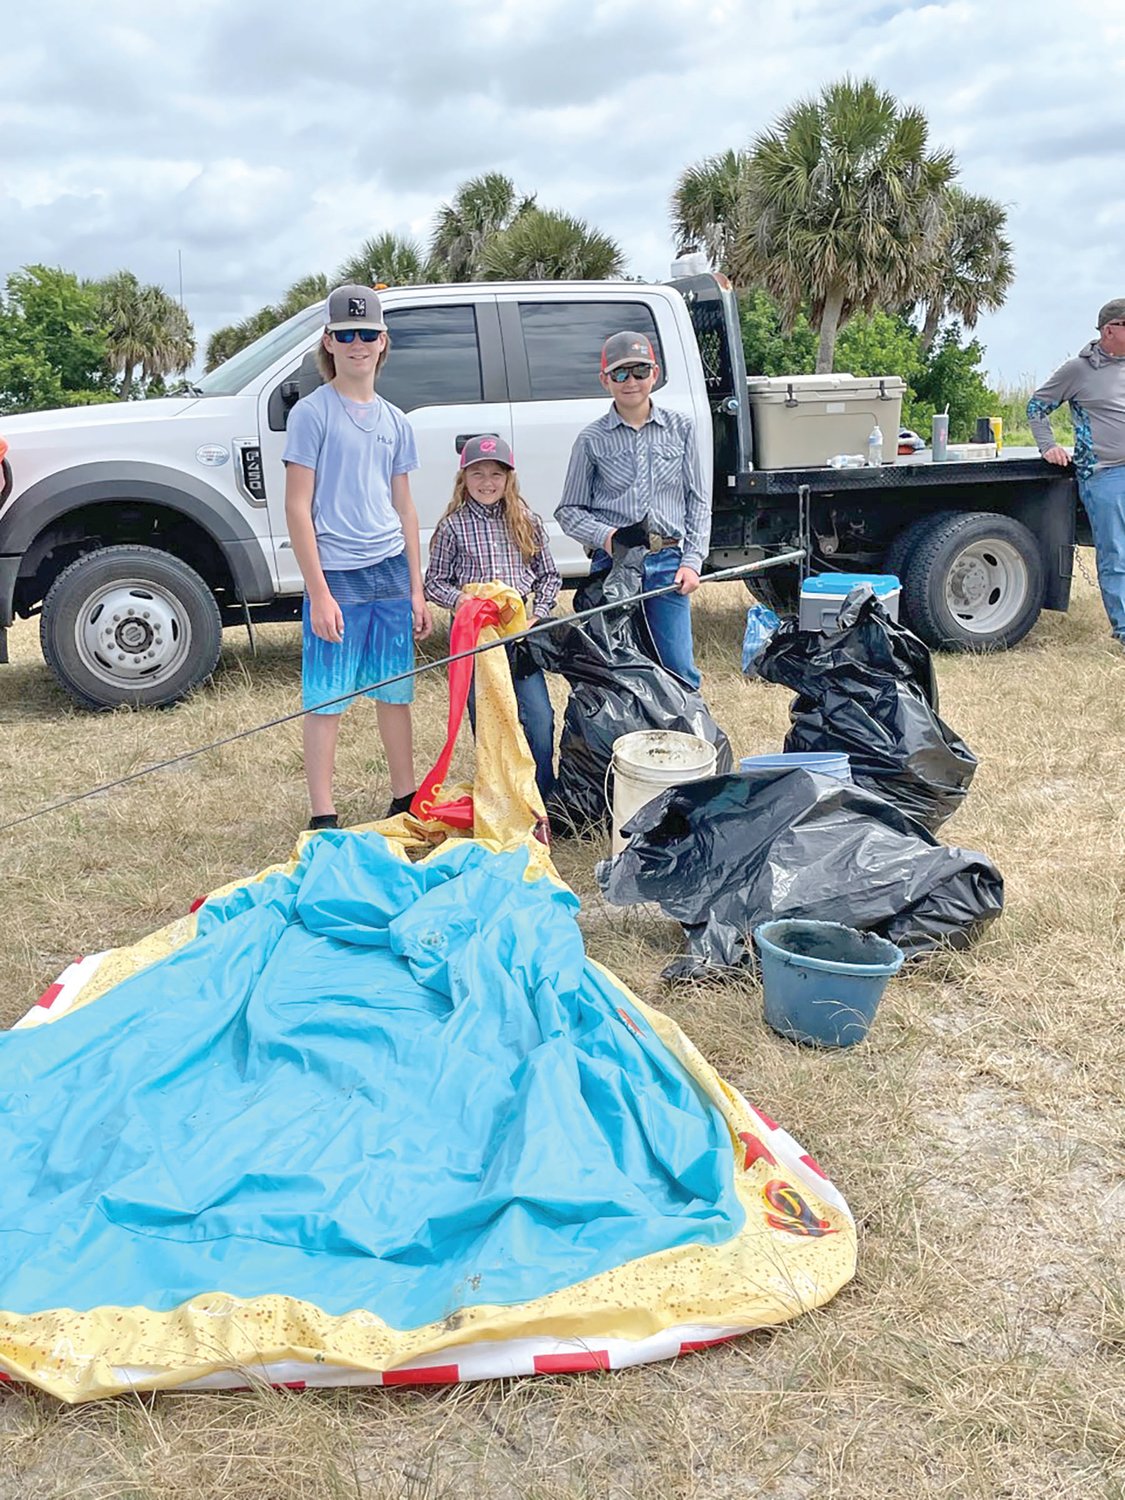 Second place winners of the Lake Okeechobee Cleanup were Blake McDonald, Avery Davis and Clayte Davis.